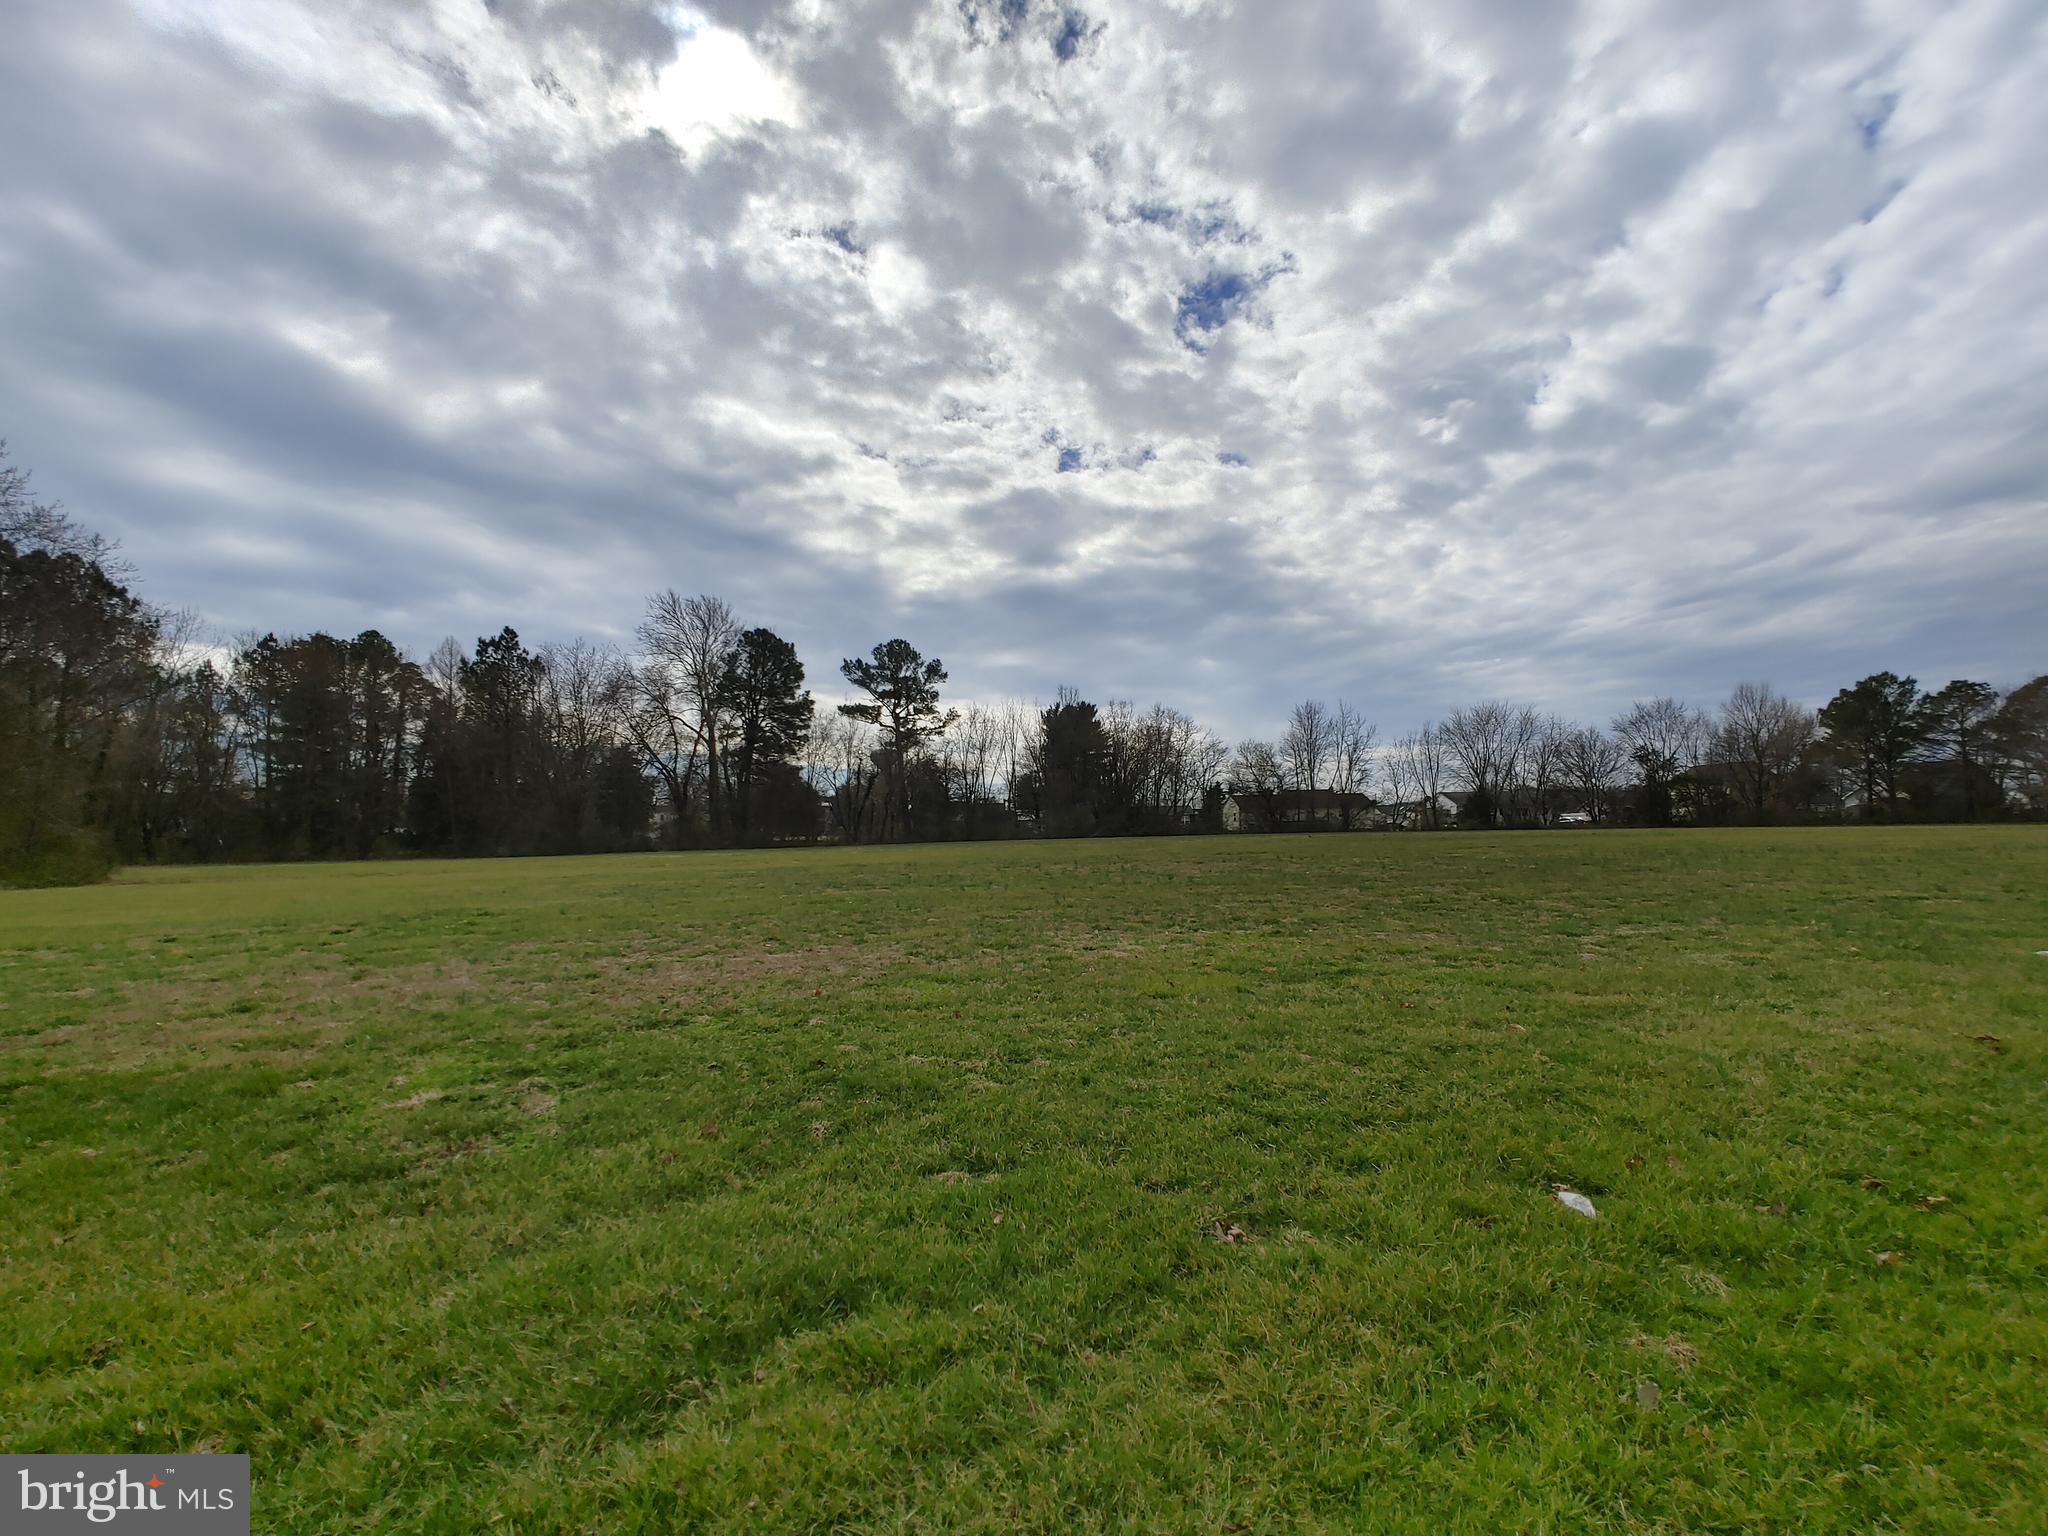 a view of a field with clear sky